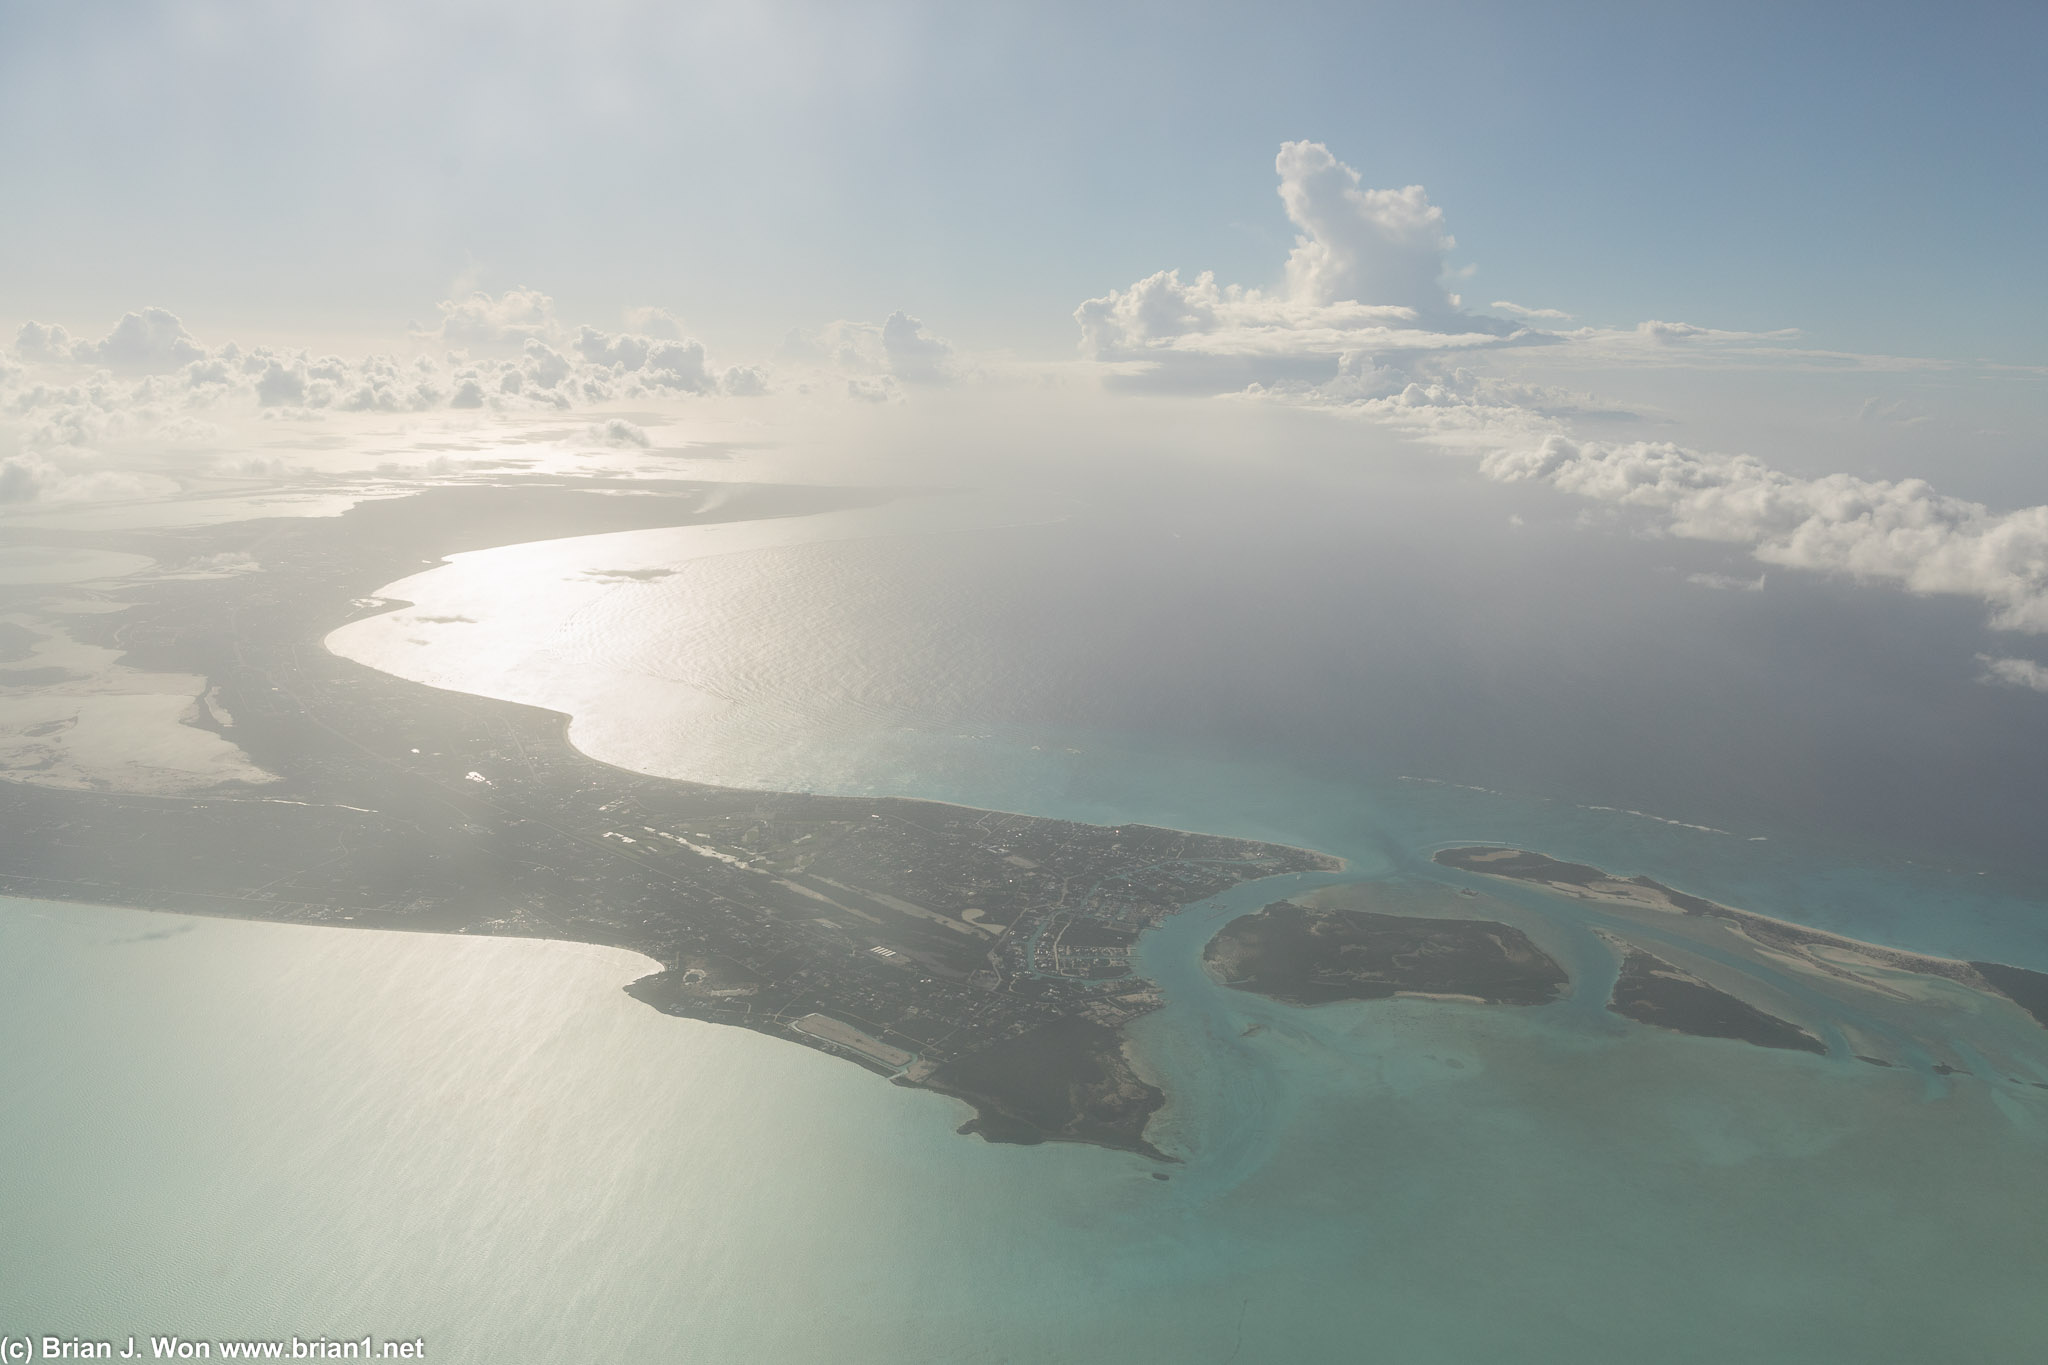 Turks and Caicos from the air.